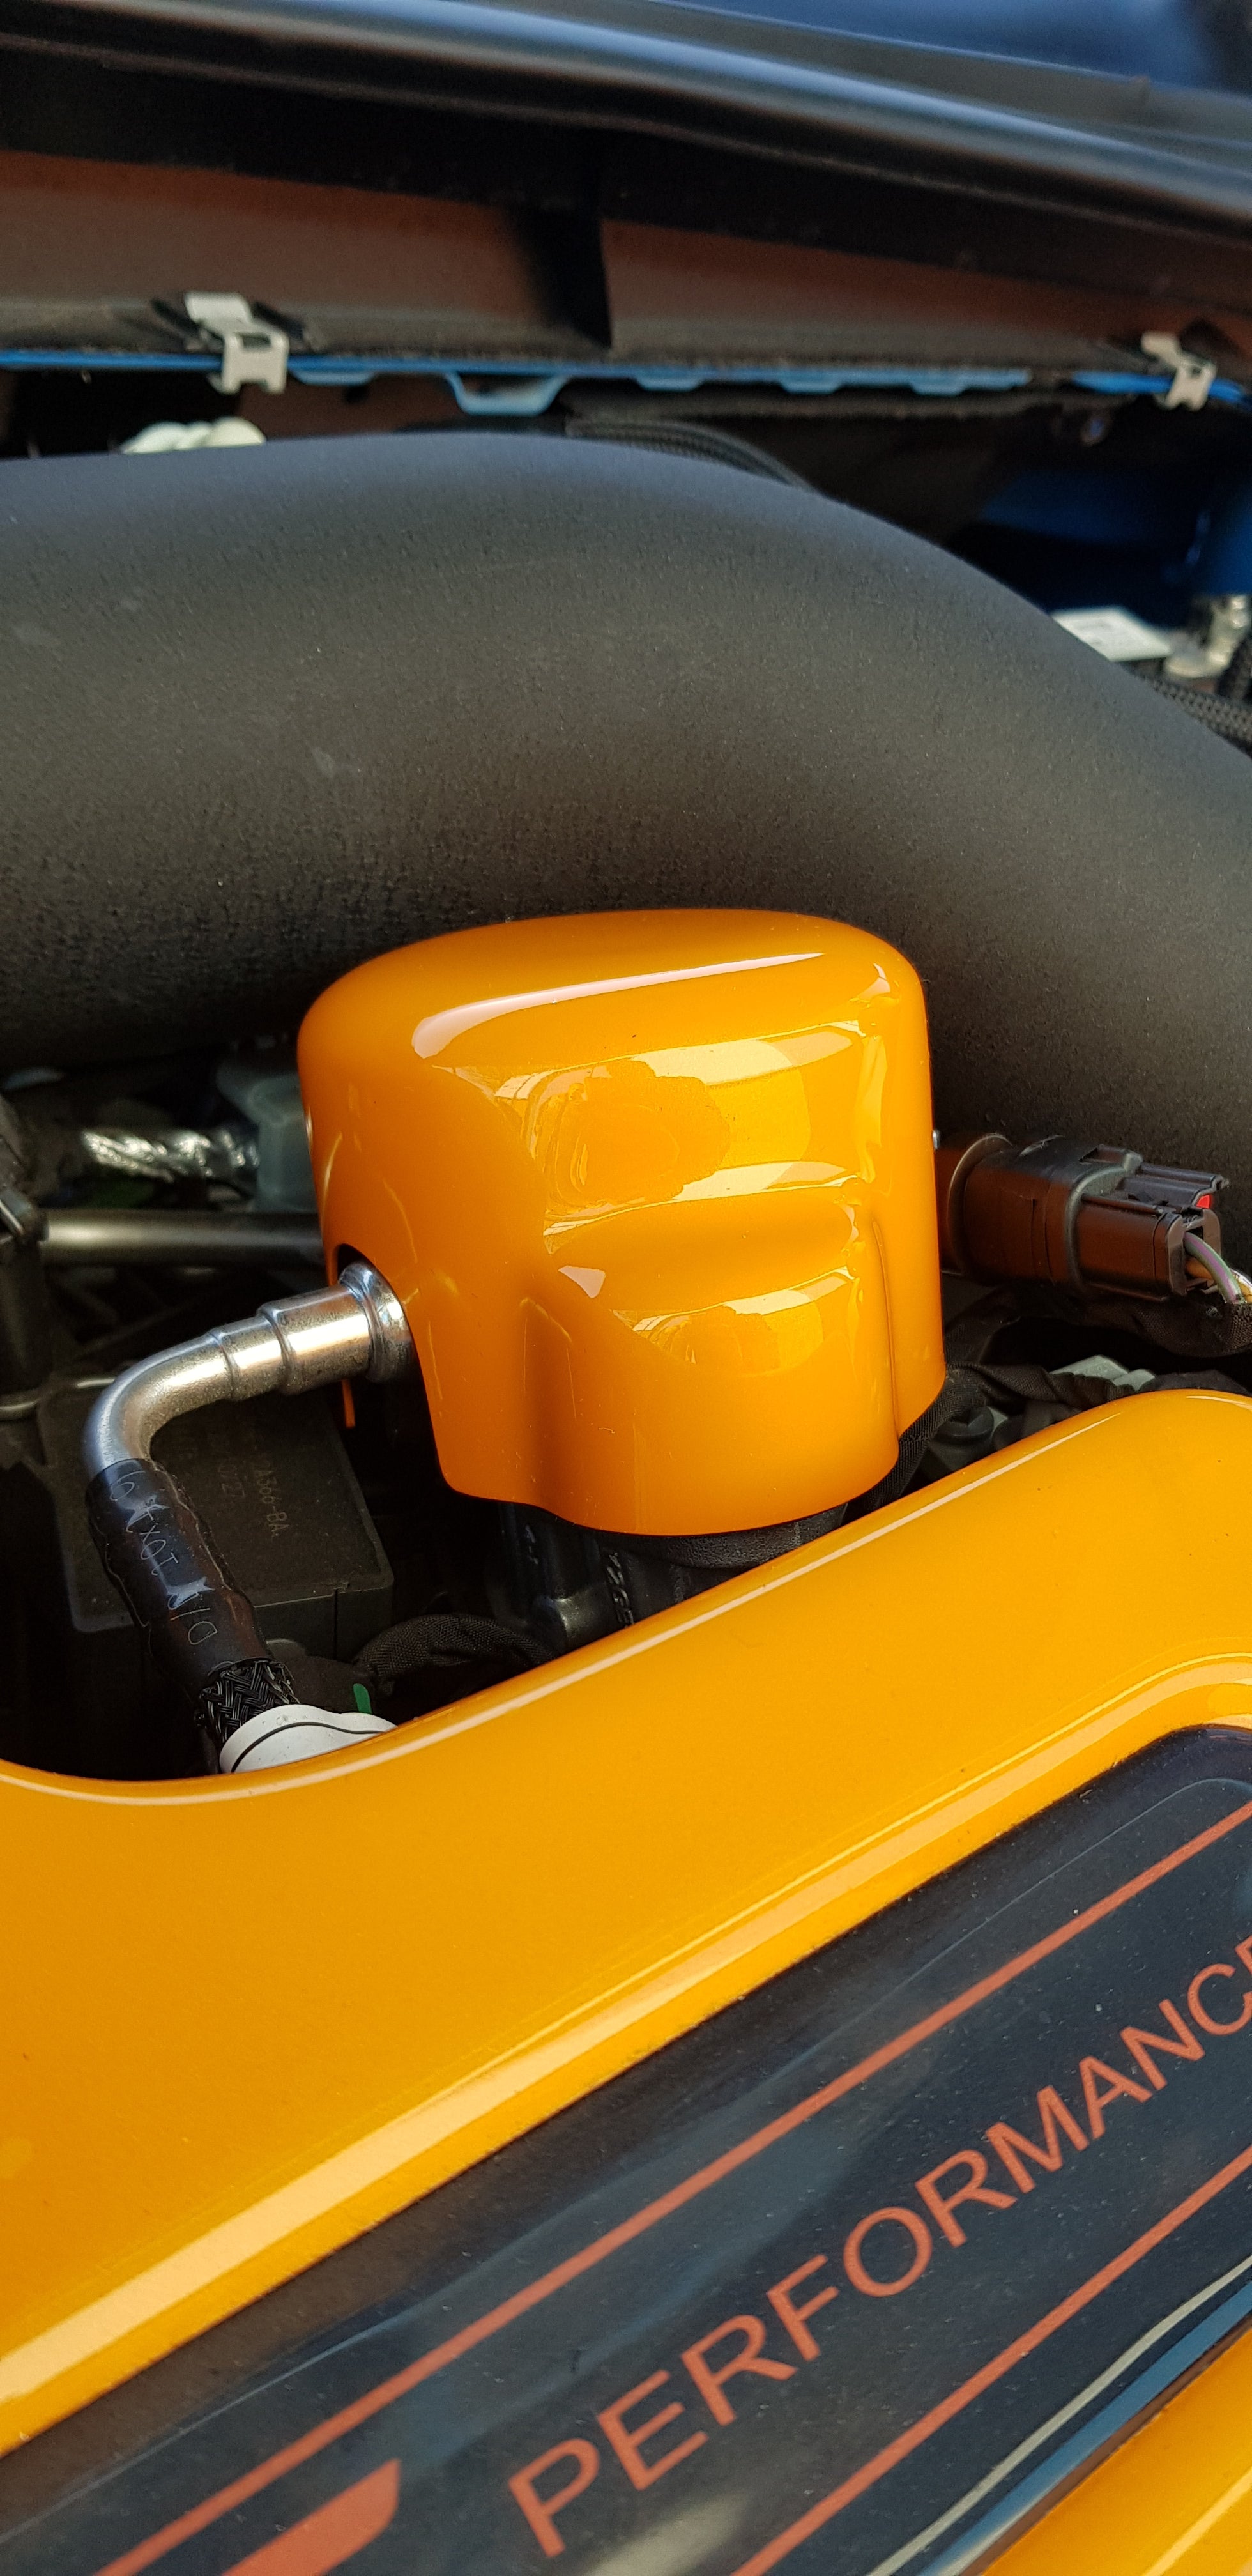 Proform Fuel Pump Cover - Mk4/4.5 Ford Focus ST Petrol (Painted Finishes)